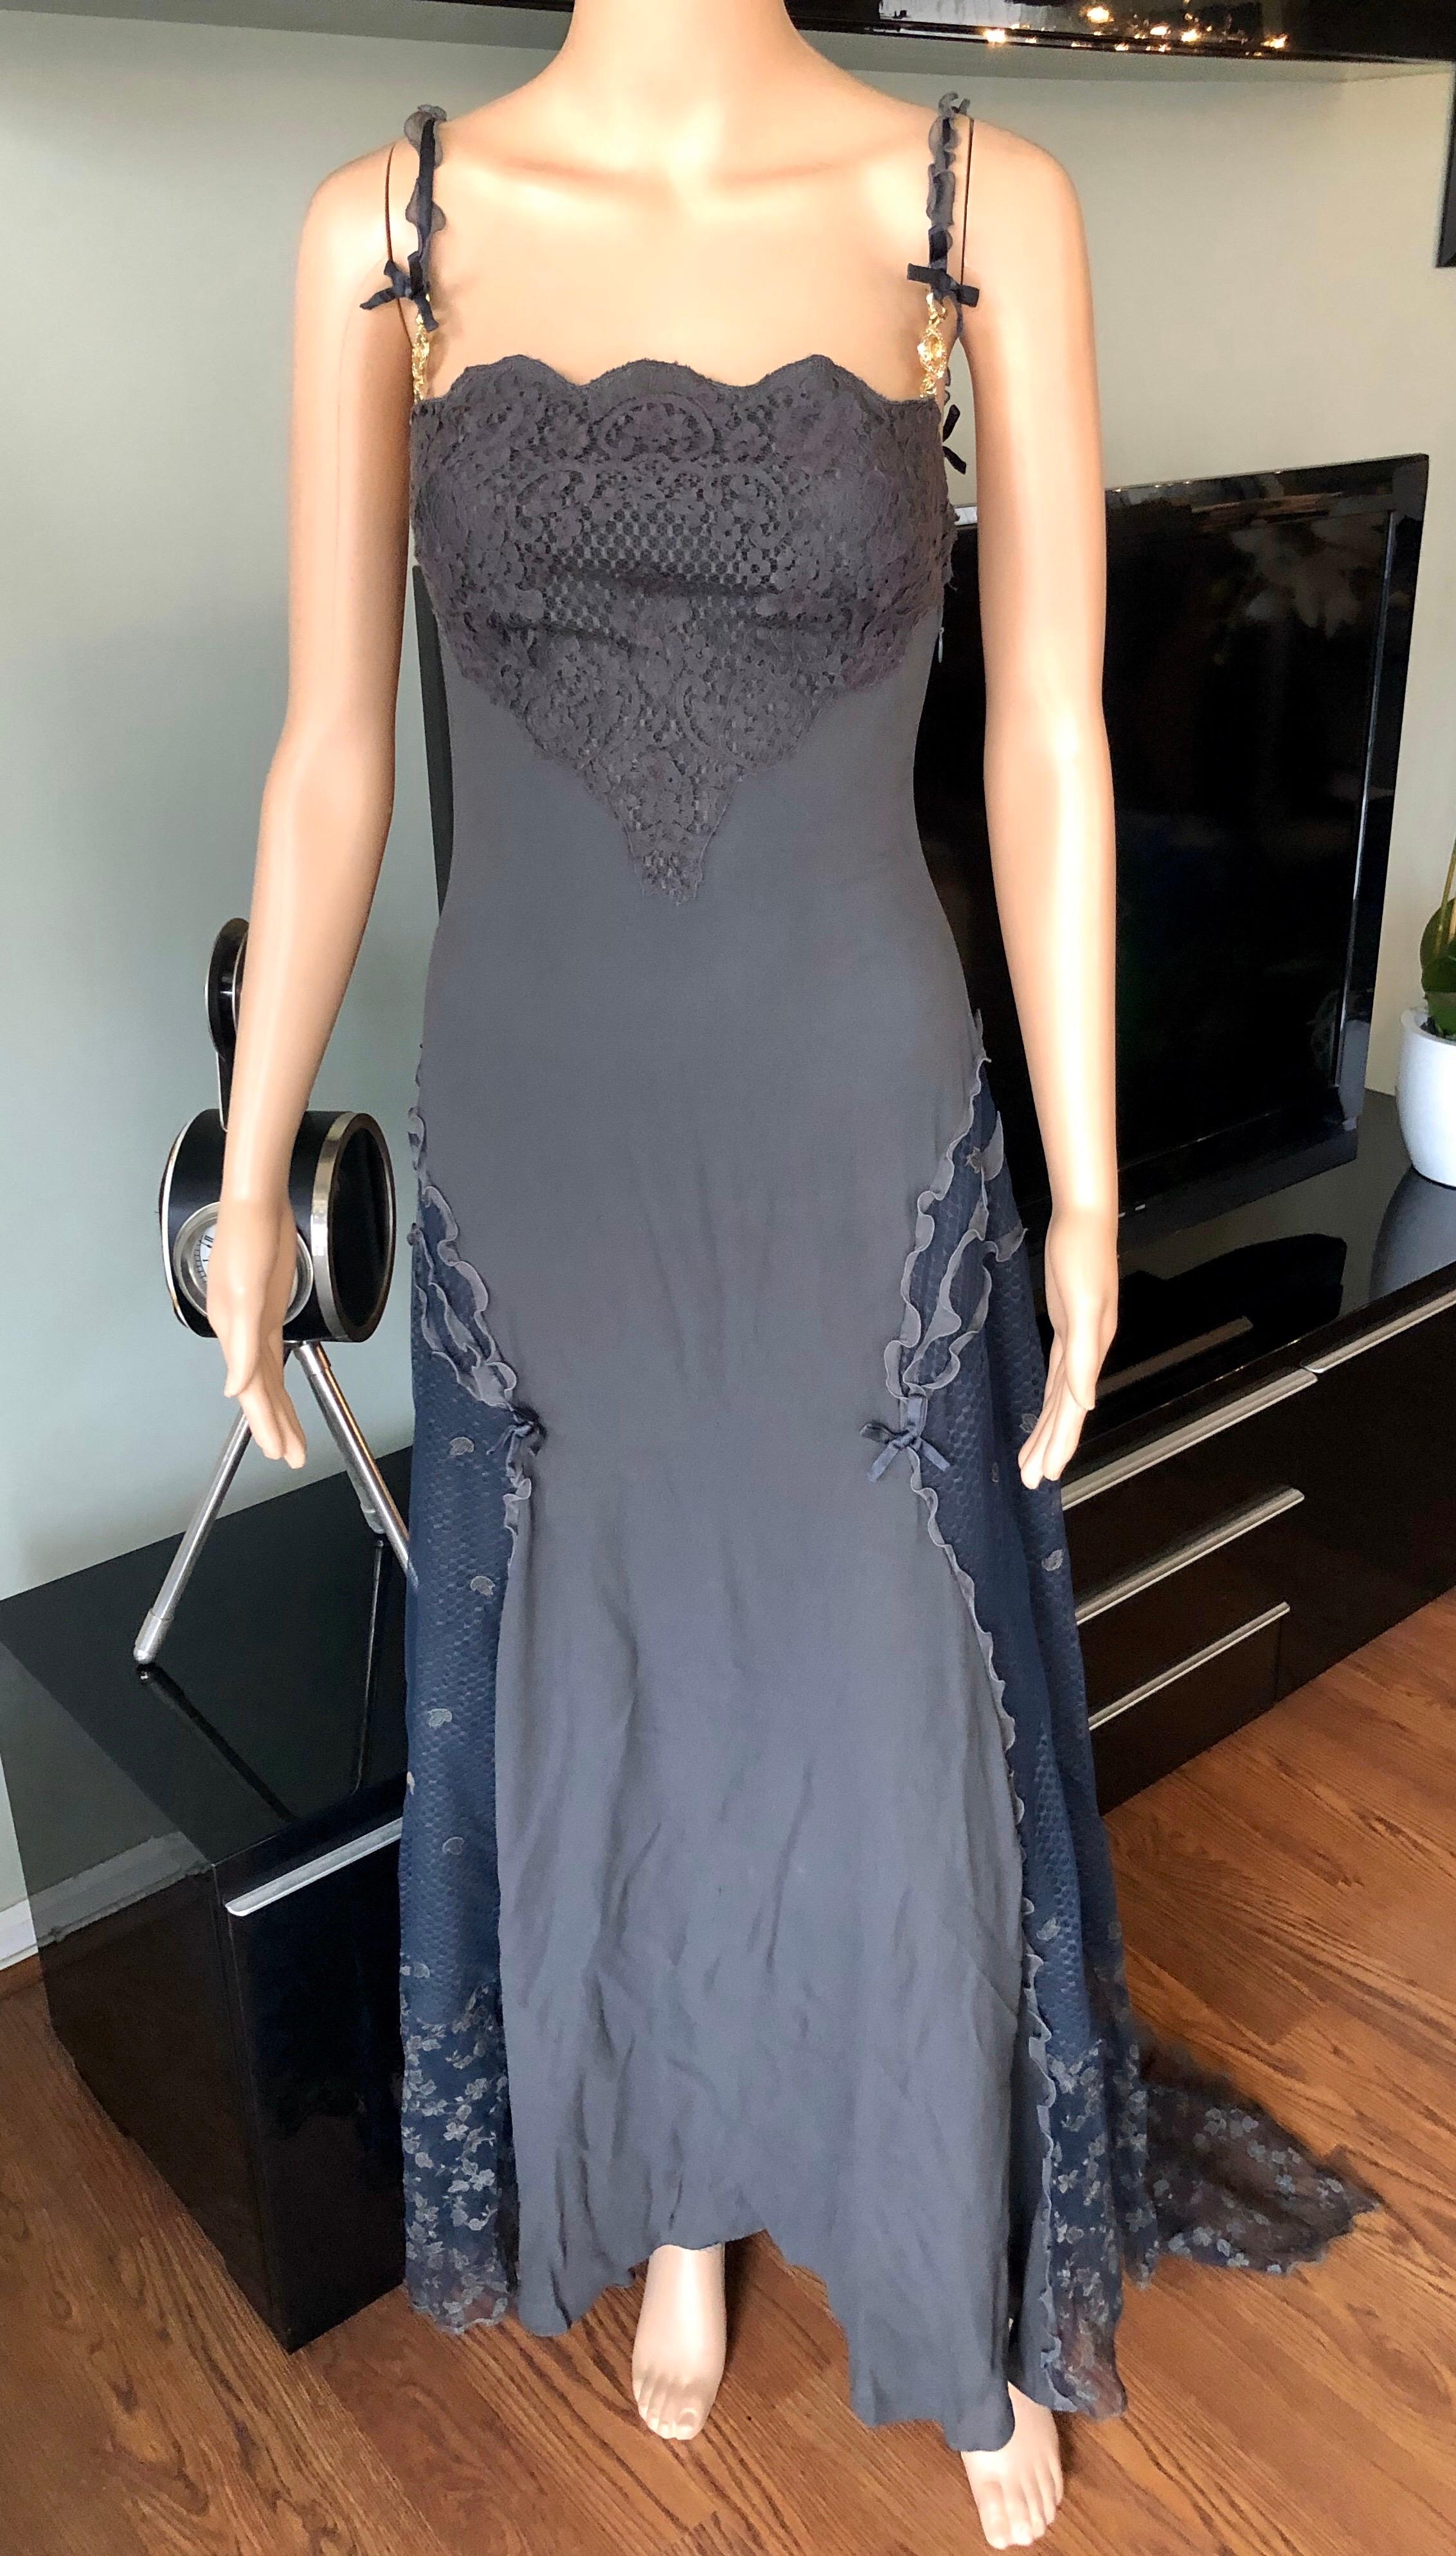 Black Gianni Versace S/S 1997 Runway Sheer Lace Panels Grey Evening Dress Gown For Sale